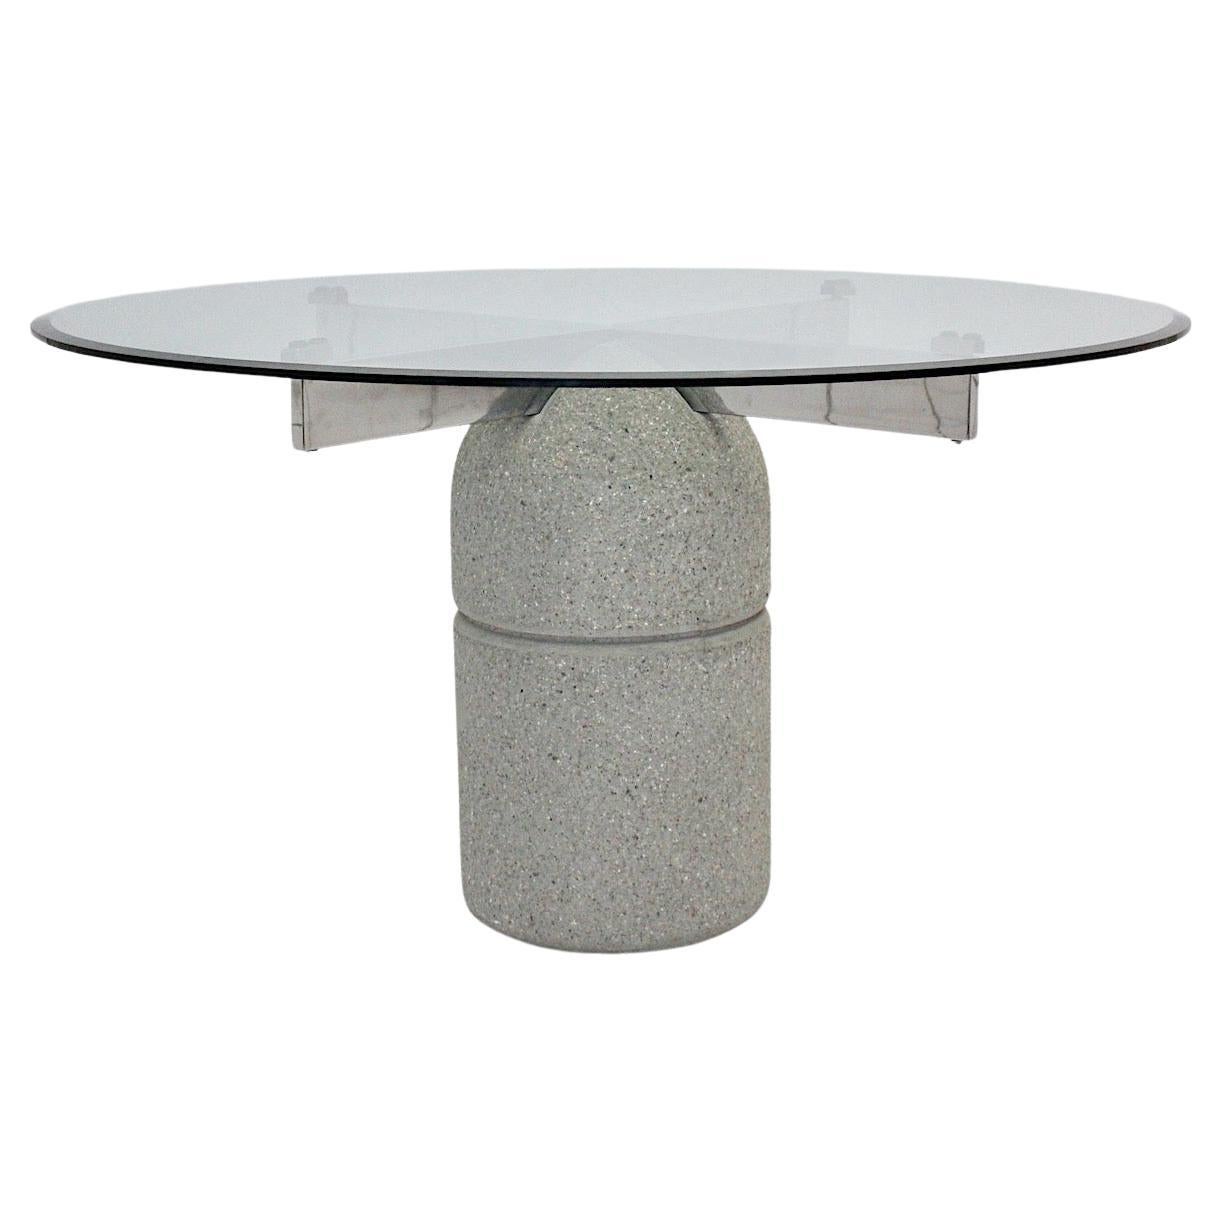 Modernist Vintage Stone Dining Table Giovanni Offredi for Saporiti 1973 Italy For Sale